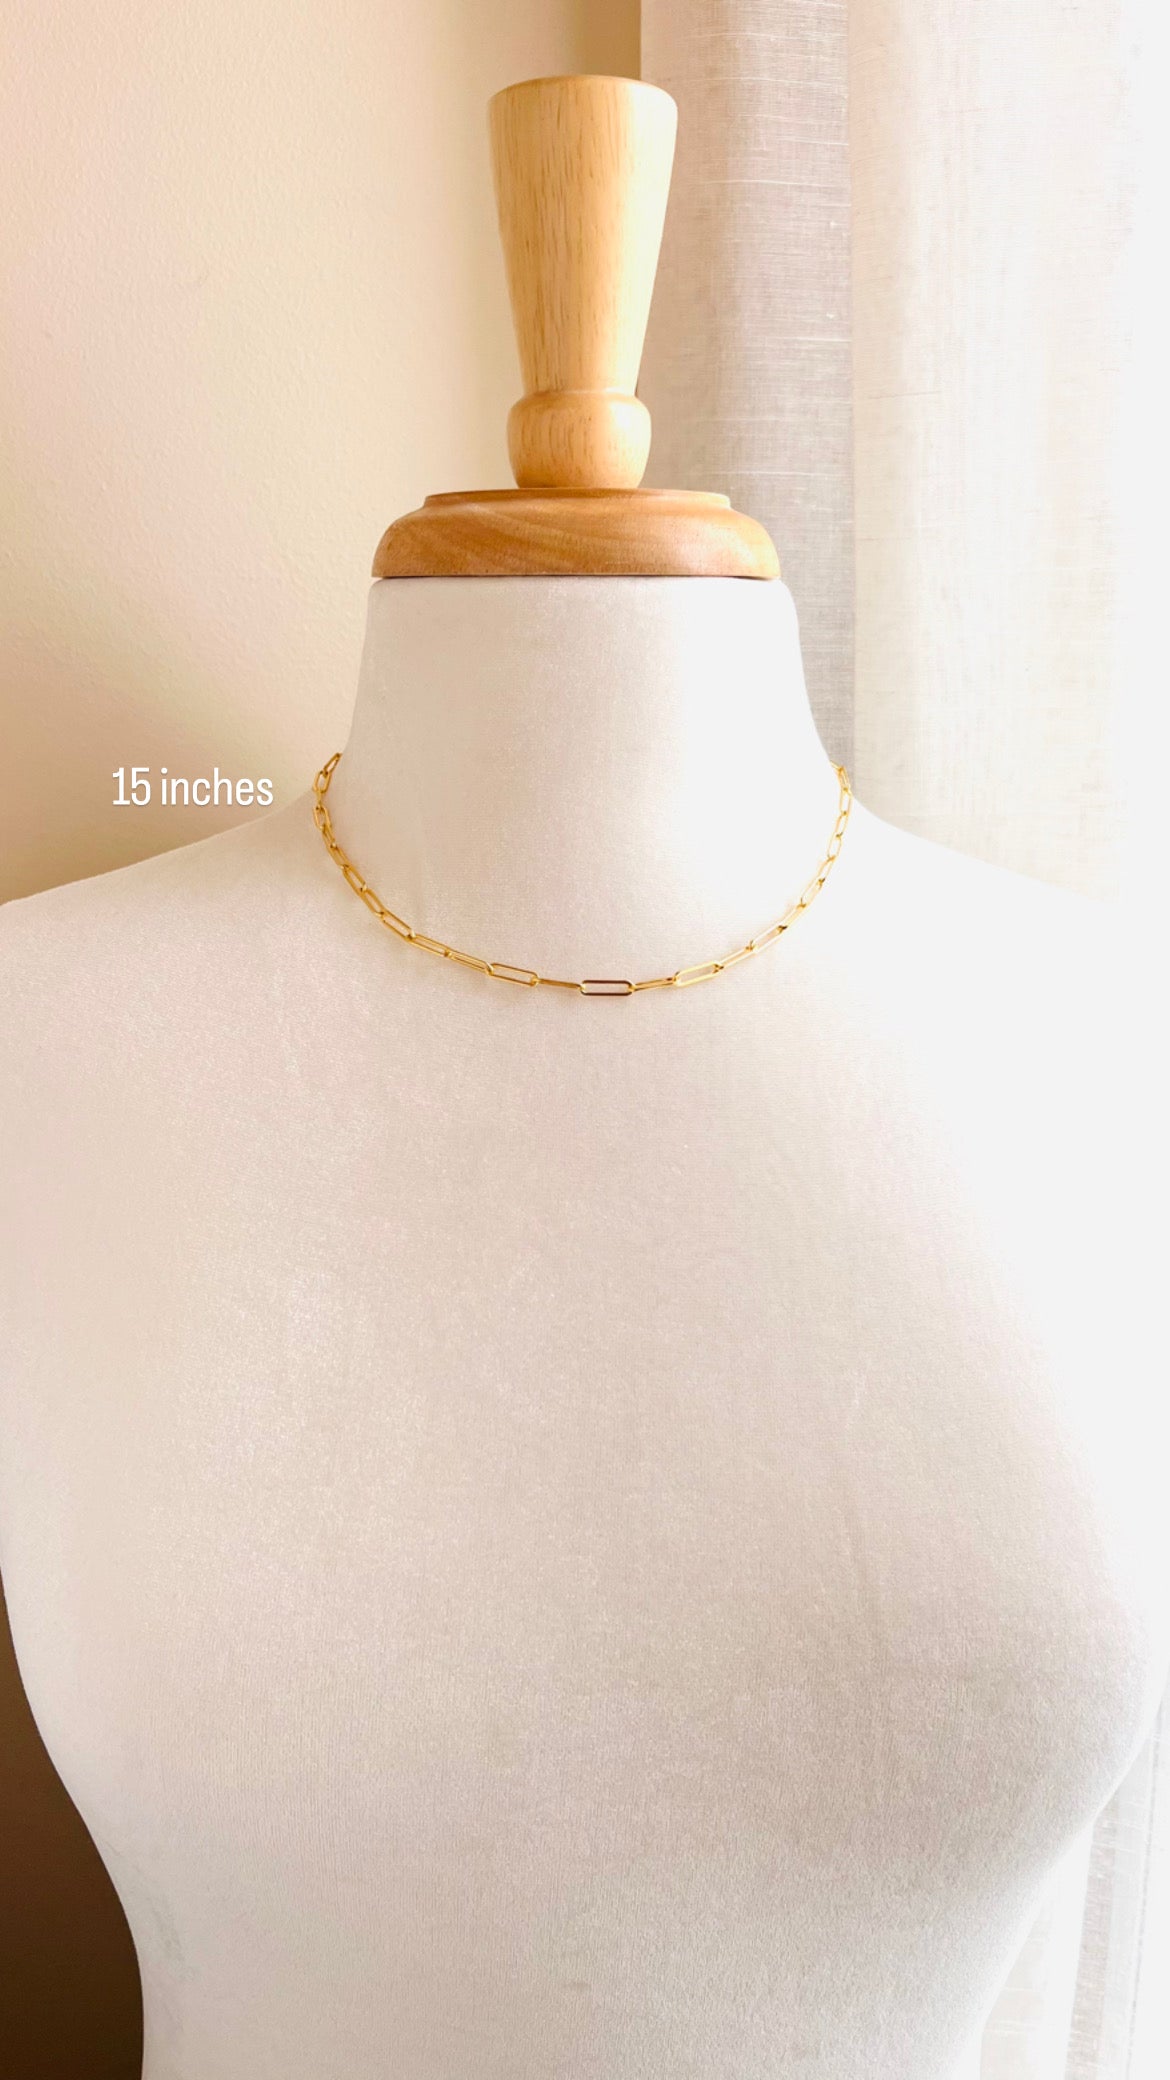 Chunky Paperclip Necklace, Chain Necklace, Minimalist Jewelry, Chain Link Necklace, Everyday Necklace, 14K Gold Filled Paperclip Chain